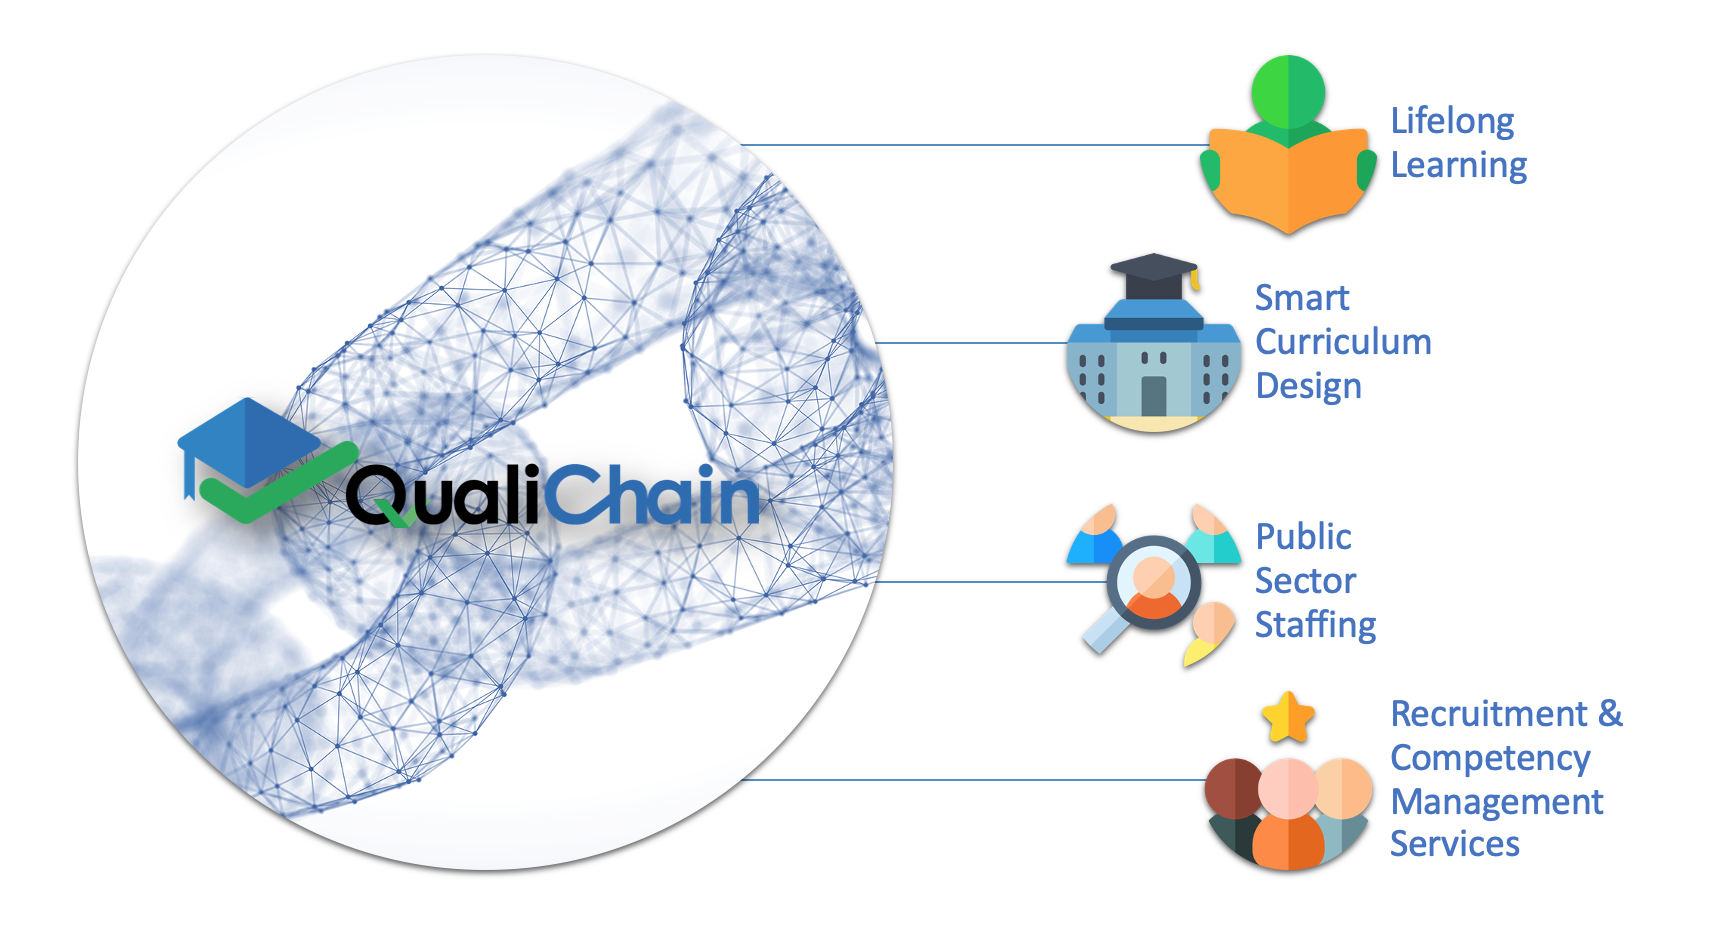 Figure 3: The key areas targeted by the QualiChain project.